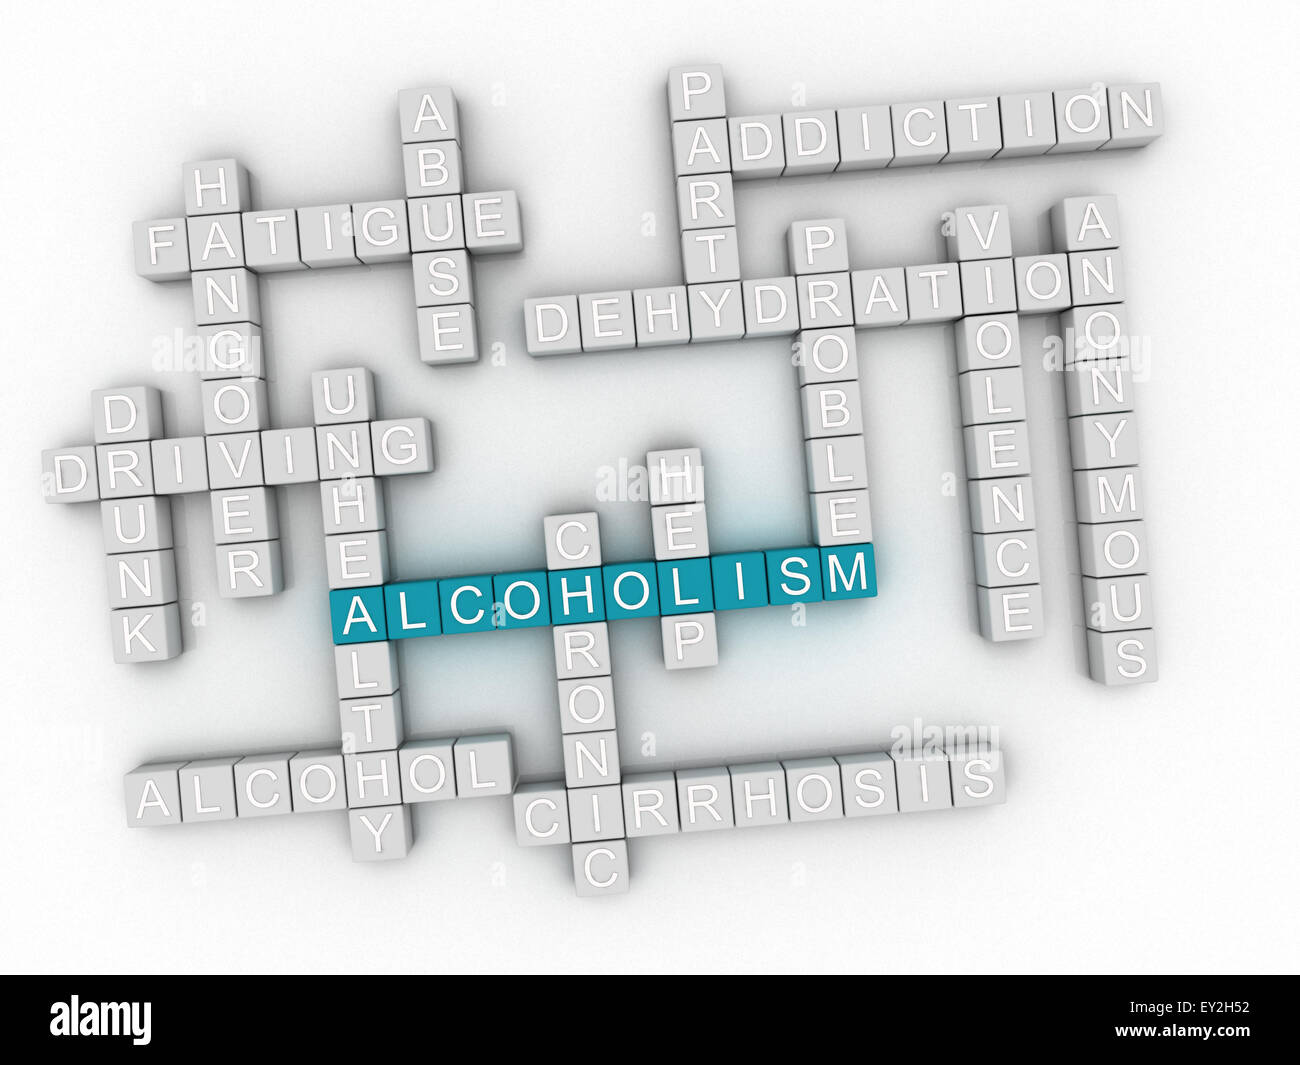 3d image Alcoholism issues concept word cloud background Stock Photo